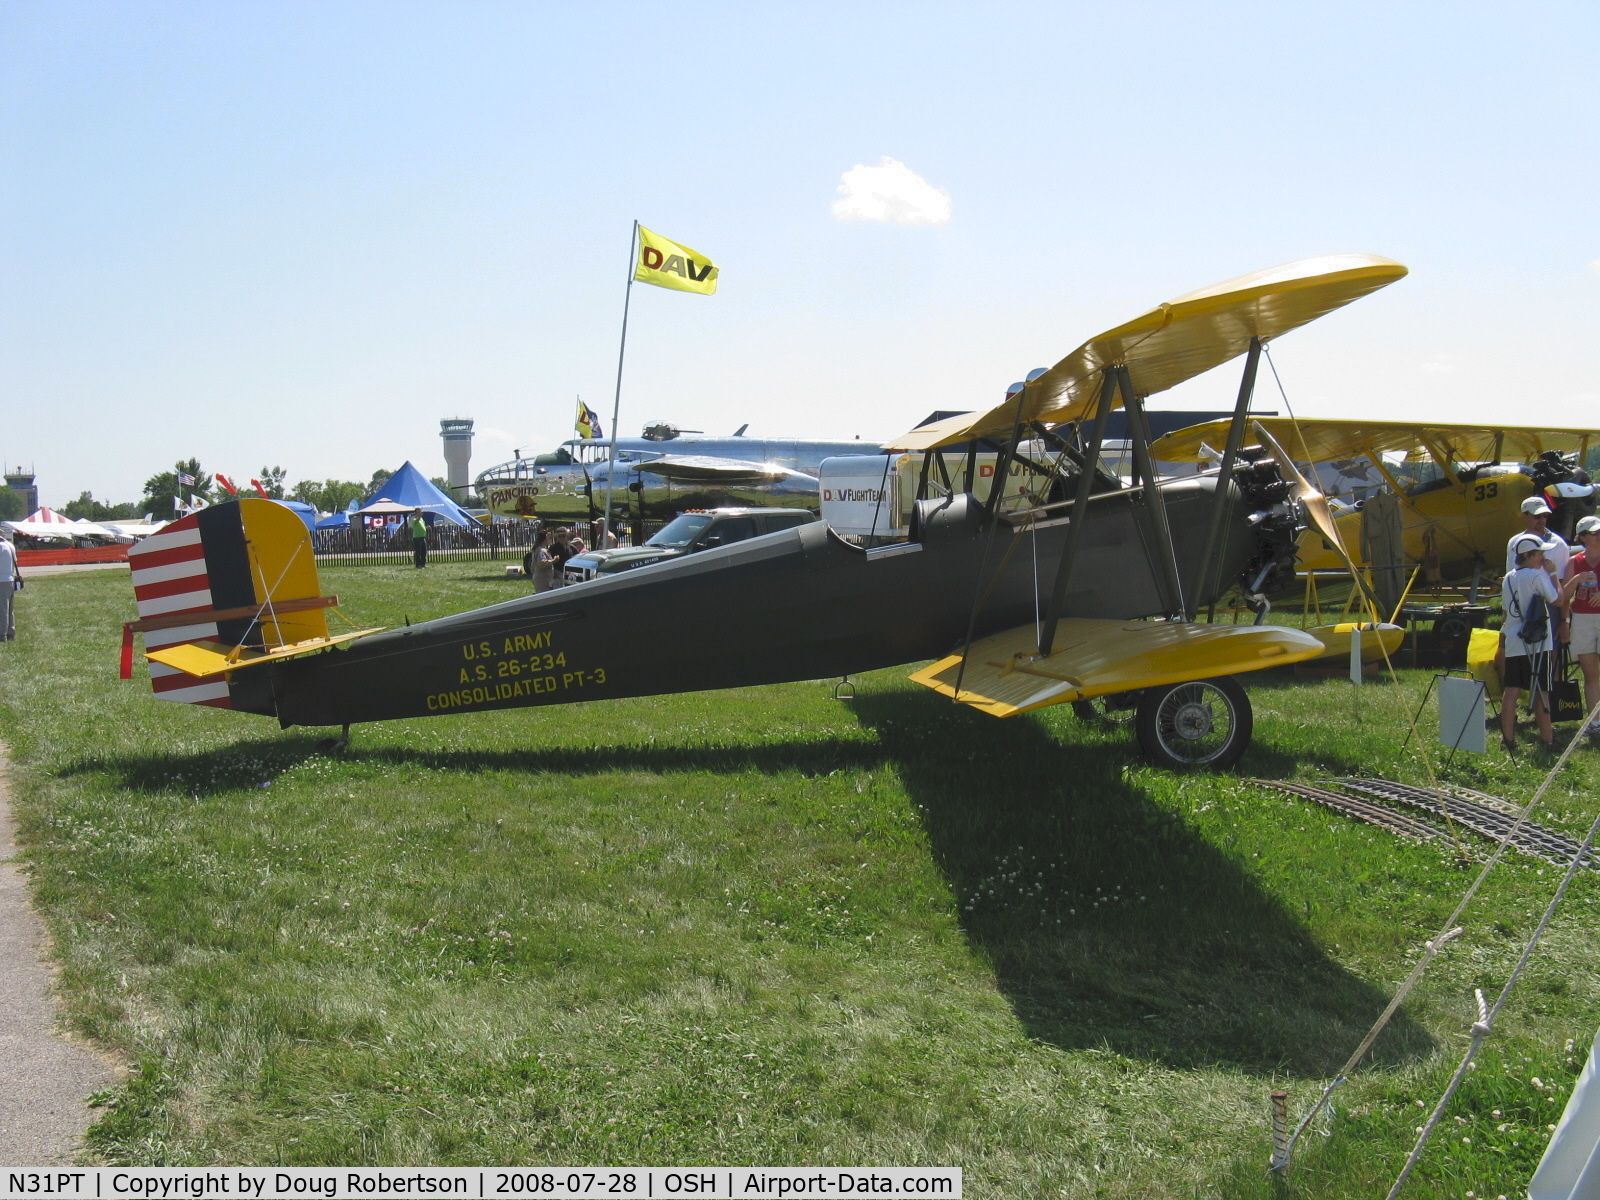 N31PT, 1998 Consolidated PT-3 Replica C/N 1, 1998 EAA Foundation POBEREZNY Consolidated PT-3 'HUSKY', Continental R-670-11 220 Hp reconstruction